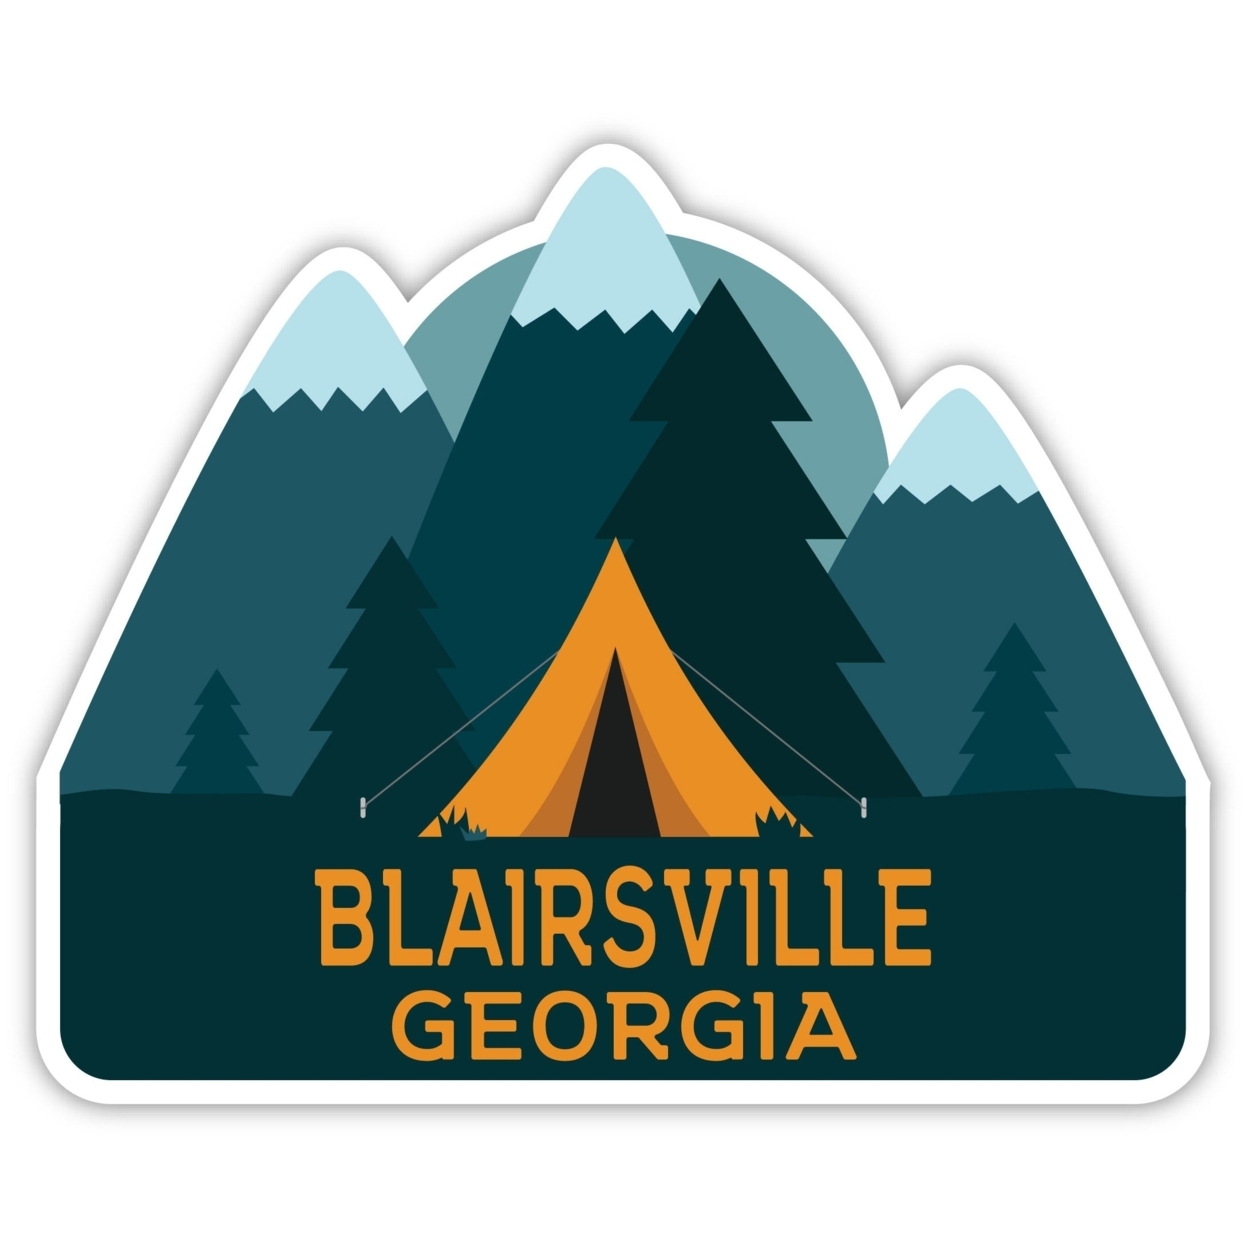 Blairsville Georgia Souvenir Decorative Stickers (Choose Theme And Size) - 4-Pack, 8-Inch, Tent